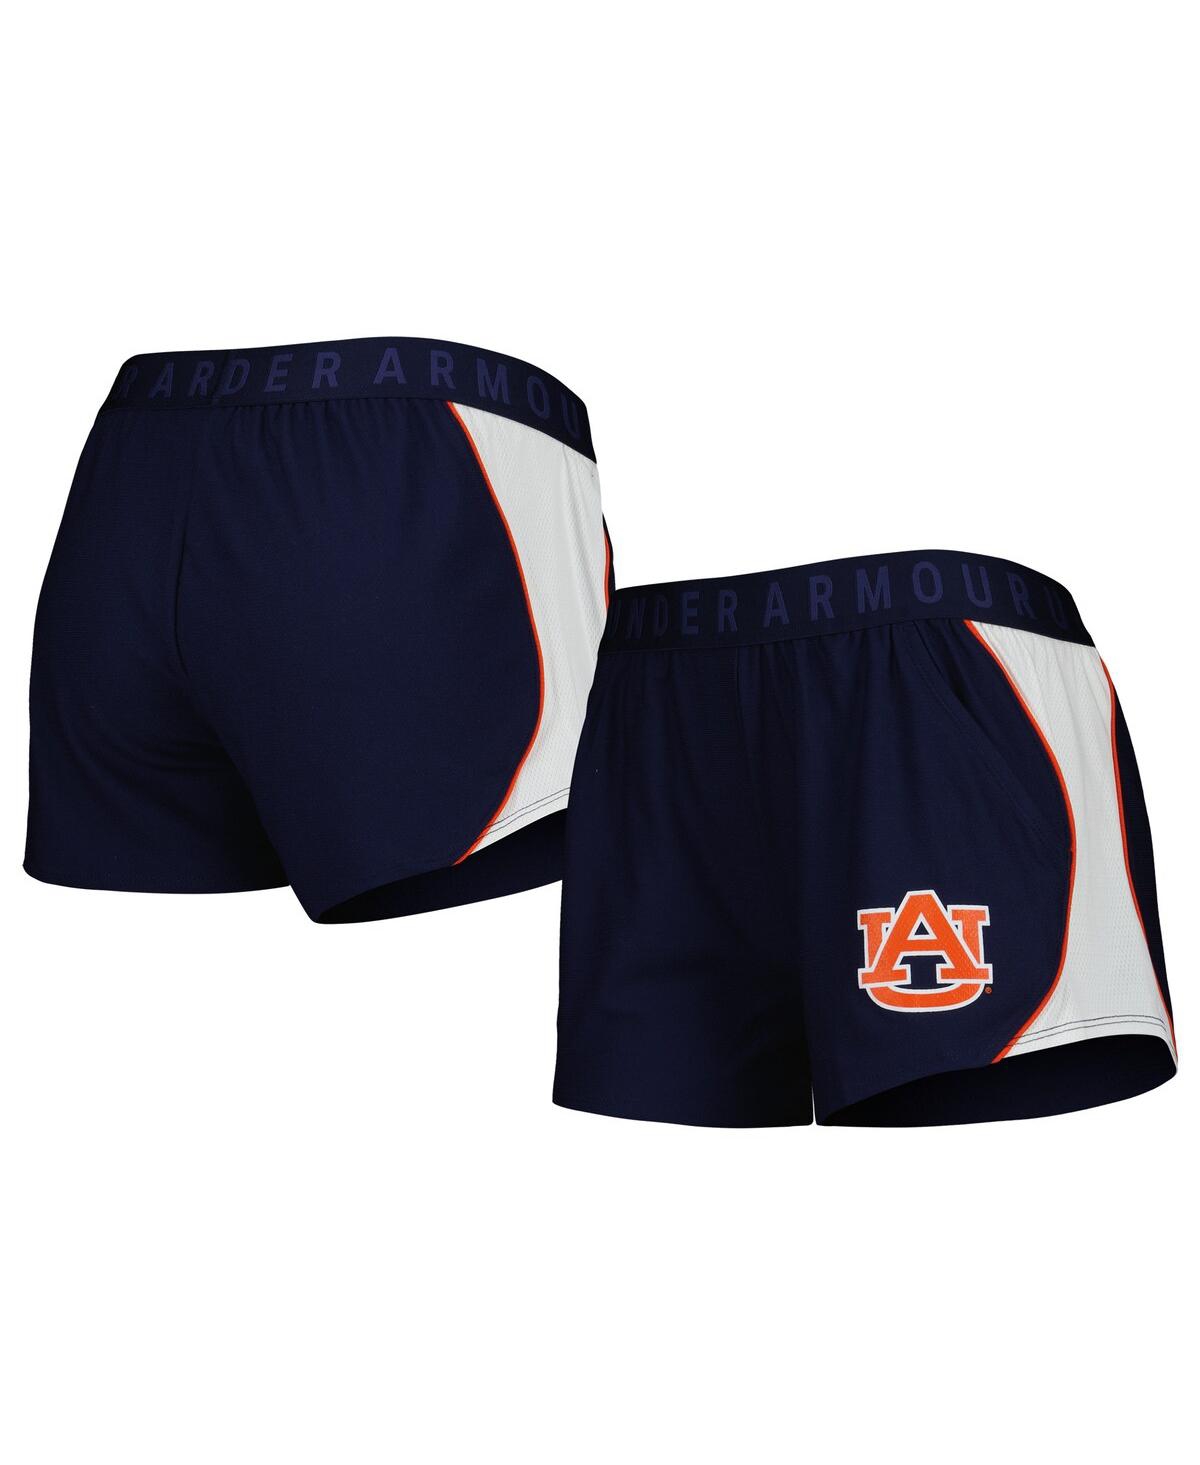 UNDER ARMOUR WOMEN'S UNDER ARMOUR NAVY AND ORANGE AUBURN TIGERS GAME DAY TECH MESH PERFORMANCE SHORTS